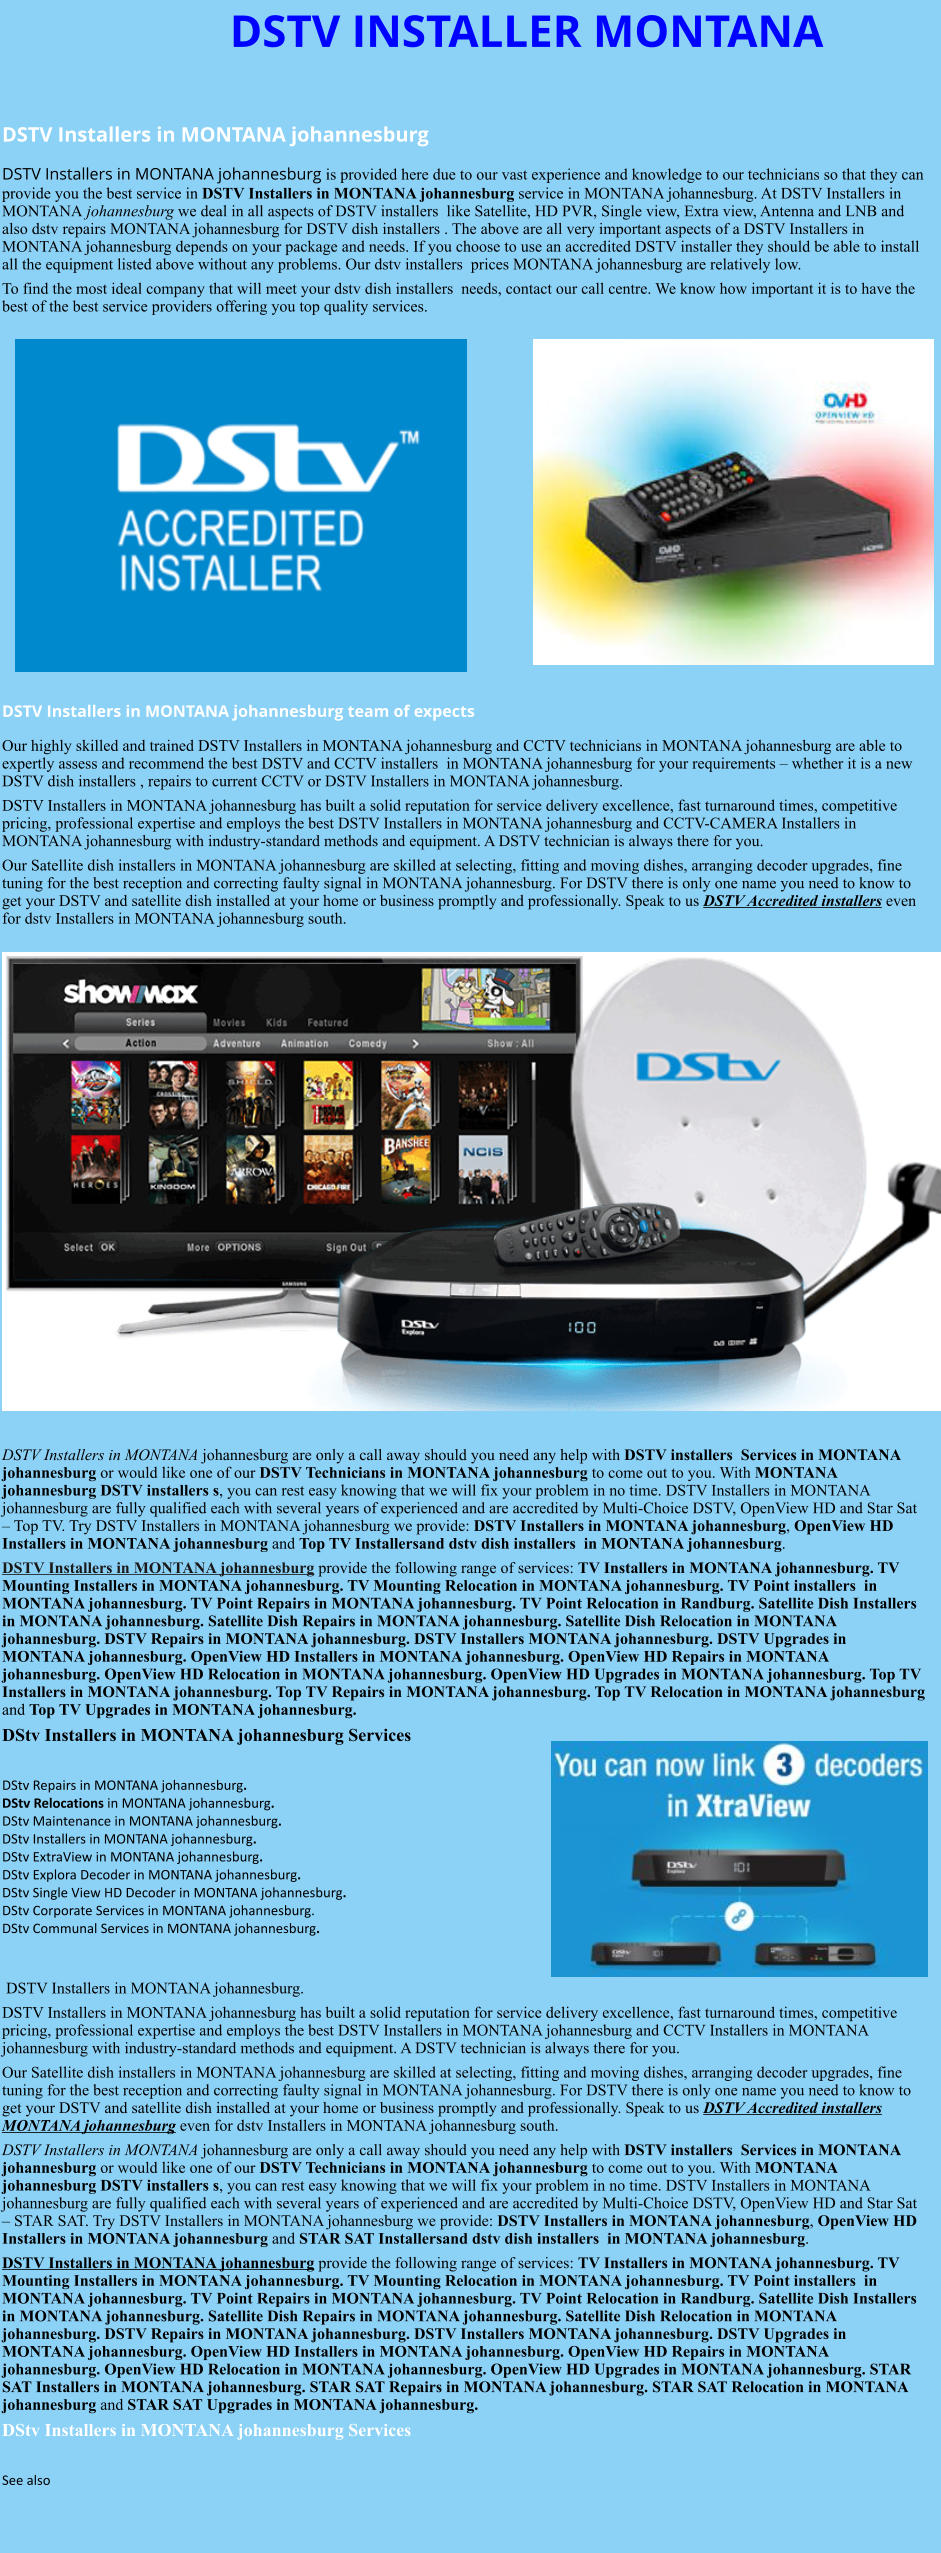 DSTV INSTALLER MONTANA  DSTV Installers in MONTANA johannesburg  DSTV Installers in MONTANA johannesburg is provided here due to our vast experience and knowledge to our technicians so that they can provide you the best service in DSTV Installers in MONTANA johannesburg service in MONTANA johannesburg. At DSTV Installers in MONTANA johannesburg we deal in all aspects of DSTV installers  like Satellite, HD PVR, Single view, Extra view, Antenna and LNB and also dstv repairs MONTANA johannesburg for DSTV dish installers . The above are all very important aspects of a DSTV Installers in MONTANA johannesburg depends on your package and needs. If you choose to use an accredited DSTV installer they should be able to install all the equipment listed above without any problems. Our dstv installers  prices MONTANA johannesburg are relatively low. To find the most ideal company that will meet your dstv dish installers  needs, contact our call centre. We know how important it is to have the best of the best service providers offering you top quality services.                DSTV Installers in MONTANA johannesburg team of expects Our highly skilled and trained DSTV Installers in MONTANA johannesburg and CCTV technicians in MONTANA johannesburg are able to expertly assess and recommend the best DSTV and CCTV installers  in MONTANA johannesburg for your requirements – whether it is a new DSTV dish installers , repairs to current CCTV or DSTV Installers in MONTANA johannesburg. DSTV Installers in MONTANA johannesburg has built a solid reputation for service delivery excellence, fast turnaround times, competitive pricing, professional expertise and employs the best DSTV Installers in MONTANA johannesburg and CCTV-CAMERA Installers in MONTANA johannesburg with industry-standard methods and equipment. A DSTV technician is always there for you. Our Satellite dish installers in MONTANA johannesburg are skilled at selecting, fitting and moving dishes, arranging decoder upgrades, fine tuning for the best reception and correcting faulty signal in MONTANA johannesburg. For DSTV there is only one name you need to know to get your DSTV and satellite dish installed at your home or business promptly and professionally. Speak to us DSTV Accredited installers even for dstv Installers in MONTANA johannesburg south.                      DSTV Installers in MONTANA johannesburg are only a call away should you need any help with DSTV installers  Services in MONTANA johannesburg or would like one of our DSTV Technicians in MONTANA johannesburg to come out to you. With MONTANA johannesburg DSTV installers s, you can rest easy knowing that we will fix your problem in no time. DSTV Installers in MONTANA johannesburg are fully qualified each with several years of experienced and are accredited by Multi-Choice DSTV, OpenView HD and Star Sat – Top TV. Try DSTV Installers in MONTANA johannesburg we provide: DSTV Installers in MONTANA johannesburg, OpenView HD Installers in MONTANA johannesburg and Top TV Installersand dstv dish installers  in MONTANA johannesburg. DSTV Installers in MONTANA johannesburg provide the following range of services: TV Installers in MONTANA johannesburg. TV Mounting Installers in MONTANA johannesburg. TV Mounting Relocation in MONTANA johannesburg. TV Point installers  in MONTANA johannesburg. TV Point Repairs in MONTANA johannesburg. TV Point Relocation in Randburg. Satellite Dish Installers in MONTANA johannesburg. Satellite Dish Repairs in MONTANA johannesburg. Satellite Dish Relocation in MONTANA johannesburg. DSTV Repairs in MONTANA johannesburg. DSTV Installers MONTANA johannesburg. DSTV Upgrades in MONTANA johannesburg. OpenView HD Installers in MONTANA johannesburg. OpenView HD Repairs in MONTANA johannesburg. OpenView HD Relocation in MONTANA johannesburg. OpenView HD Upgrades in MONTANA johannesburg. Top TV Installers in MONTANA johannesburg. Top TV Repairs in MONTANA johannesburg. Top TV Relocation in MONTANA johannesburg and Top TV Upgrades in MONTANA johannesburg. DStv Installers in MONTANA johannesburg Services  DStv Repairs in MONTANA johannesburg.  DStv Relocations in MONTANA johannesburg.  DStv Maintenance in MONTANA johannesburg. DStv Installers in MONTANA johannesburg. DStv ExtraView in MONTANA johannesburg. DStv Explora Decoder in MONTANA johannesburg. DStv Single View HD Decoder in MONTANA johannesburg. DStv Corporate Services in MONTANA johannesburg. DStv Communal Services in MONTANA johannesburg.    DSTV Installers in MONTANA johannesburg. DSTV Installers in MONTANA johannesburg has built a solid reputation for service delivery excellence, fast turnaround times, competitive pricing, professional expertise and employs the best DSTV Installers in MONTANA johannesburg and CCTV Installers in MONTANA johannesburg with industry-standard methods and equipment. A DSTV technician is always there for you. Our Satellite dish installers in MONTANA johannesburg are skilled at selecting, fitting and moving dishes, arranging decoder upgrades, fine tuning for the best reception and correcting faulty signal in MONTANA johannesburg. For DSTV there is only one name you need to know to get your DSTV and satellite dish installed at your home or business promptly and professionally. Speak to us DSTV Accredited installers MONTANA johannesburg even for dstv Installers in MONTANA johannesburg south. DSTV Installers in MONTANA johannesburg are only a call away should you need any help with DSTV installers  Services in MONTANA johannesburg or would like one of our DSTV Technicians in MONTANA johannesburg to come out to you. With MONTANA johannesburg DSTV installers s, you can rest easy knowing that we will fix your problem in no time. DSTV Installers in MONTANA johannesburg are fully qualified each with several years of experienced and are accredited by Multi-Choice DSTV, OpenView HD and Star Sat – STAR SAT. Try DSTV Installers in MONTANA johannesburg we provide: DSTV Installers in MONTANA johannesburg, OpenView HD Installers in MONTANA johannesburg and STAR SAT Installersand dstv dish installers  in MONTANA johannesburg. DSTV Installers in MONTANA johannesburg provide the following range of services: TV Installers in MONTANA johannesburg. TV Mounting Installers in MONTANA johannesburg. TV Mounting Relocation in MONTANA johannesburg. TV Point installers  in MONTANA johannesburg. TV Point Repairs in MONTANA johannesburg. TV Point Relocation in Randburg. Satellite Dish Installers in MONTANA johannesburg. Satellite Dish Repairs in MONTANA johannesburg. Satellite Dish Relocation in MONTANA johannesburg. DSTV Repairs in MONTANA johannesburg. DSTV Installers MONTANA johannesburg. DSTV Upgrades in MONTANA johannesburg. OpenView HD Installers in MONTANA johannesburg. OpenView HD Repairs in MONTANA johannesburg. OpenView HD Relocation in MONTANA johannesburg. OpenView HD Upgrades in MONTANA johannesburg. STAR SAT Installers in MONTANA johannesburg. STAR SAT Repairs in MONTANA johannesburg. STAR SAT Relocation in MONTANA johannesburg and STAR SAT Upgrades in MONTANA johannesburg. DStv Installers in MONTANA johannesburg Services  See also